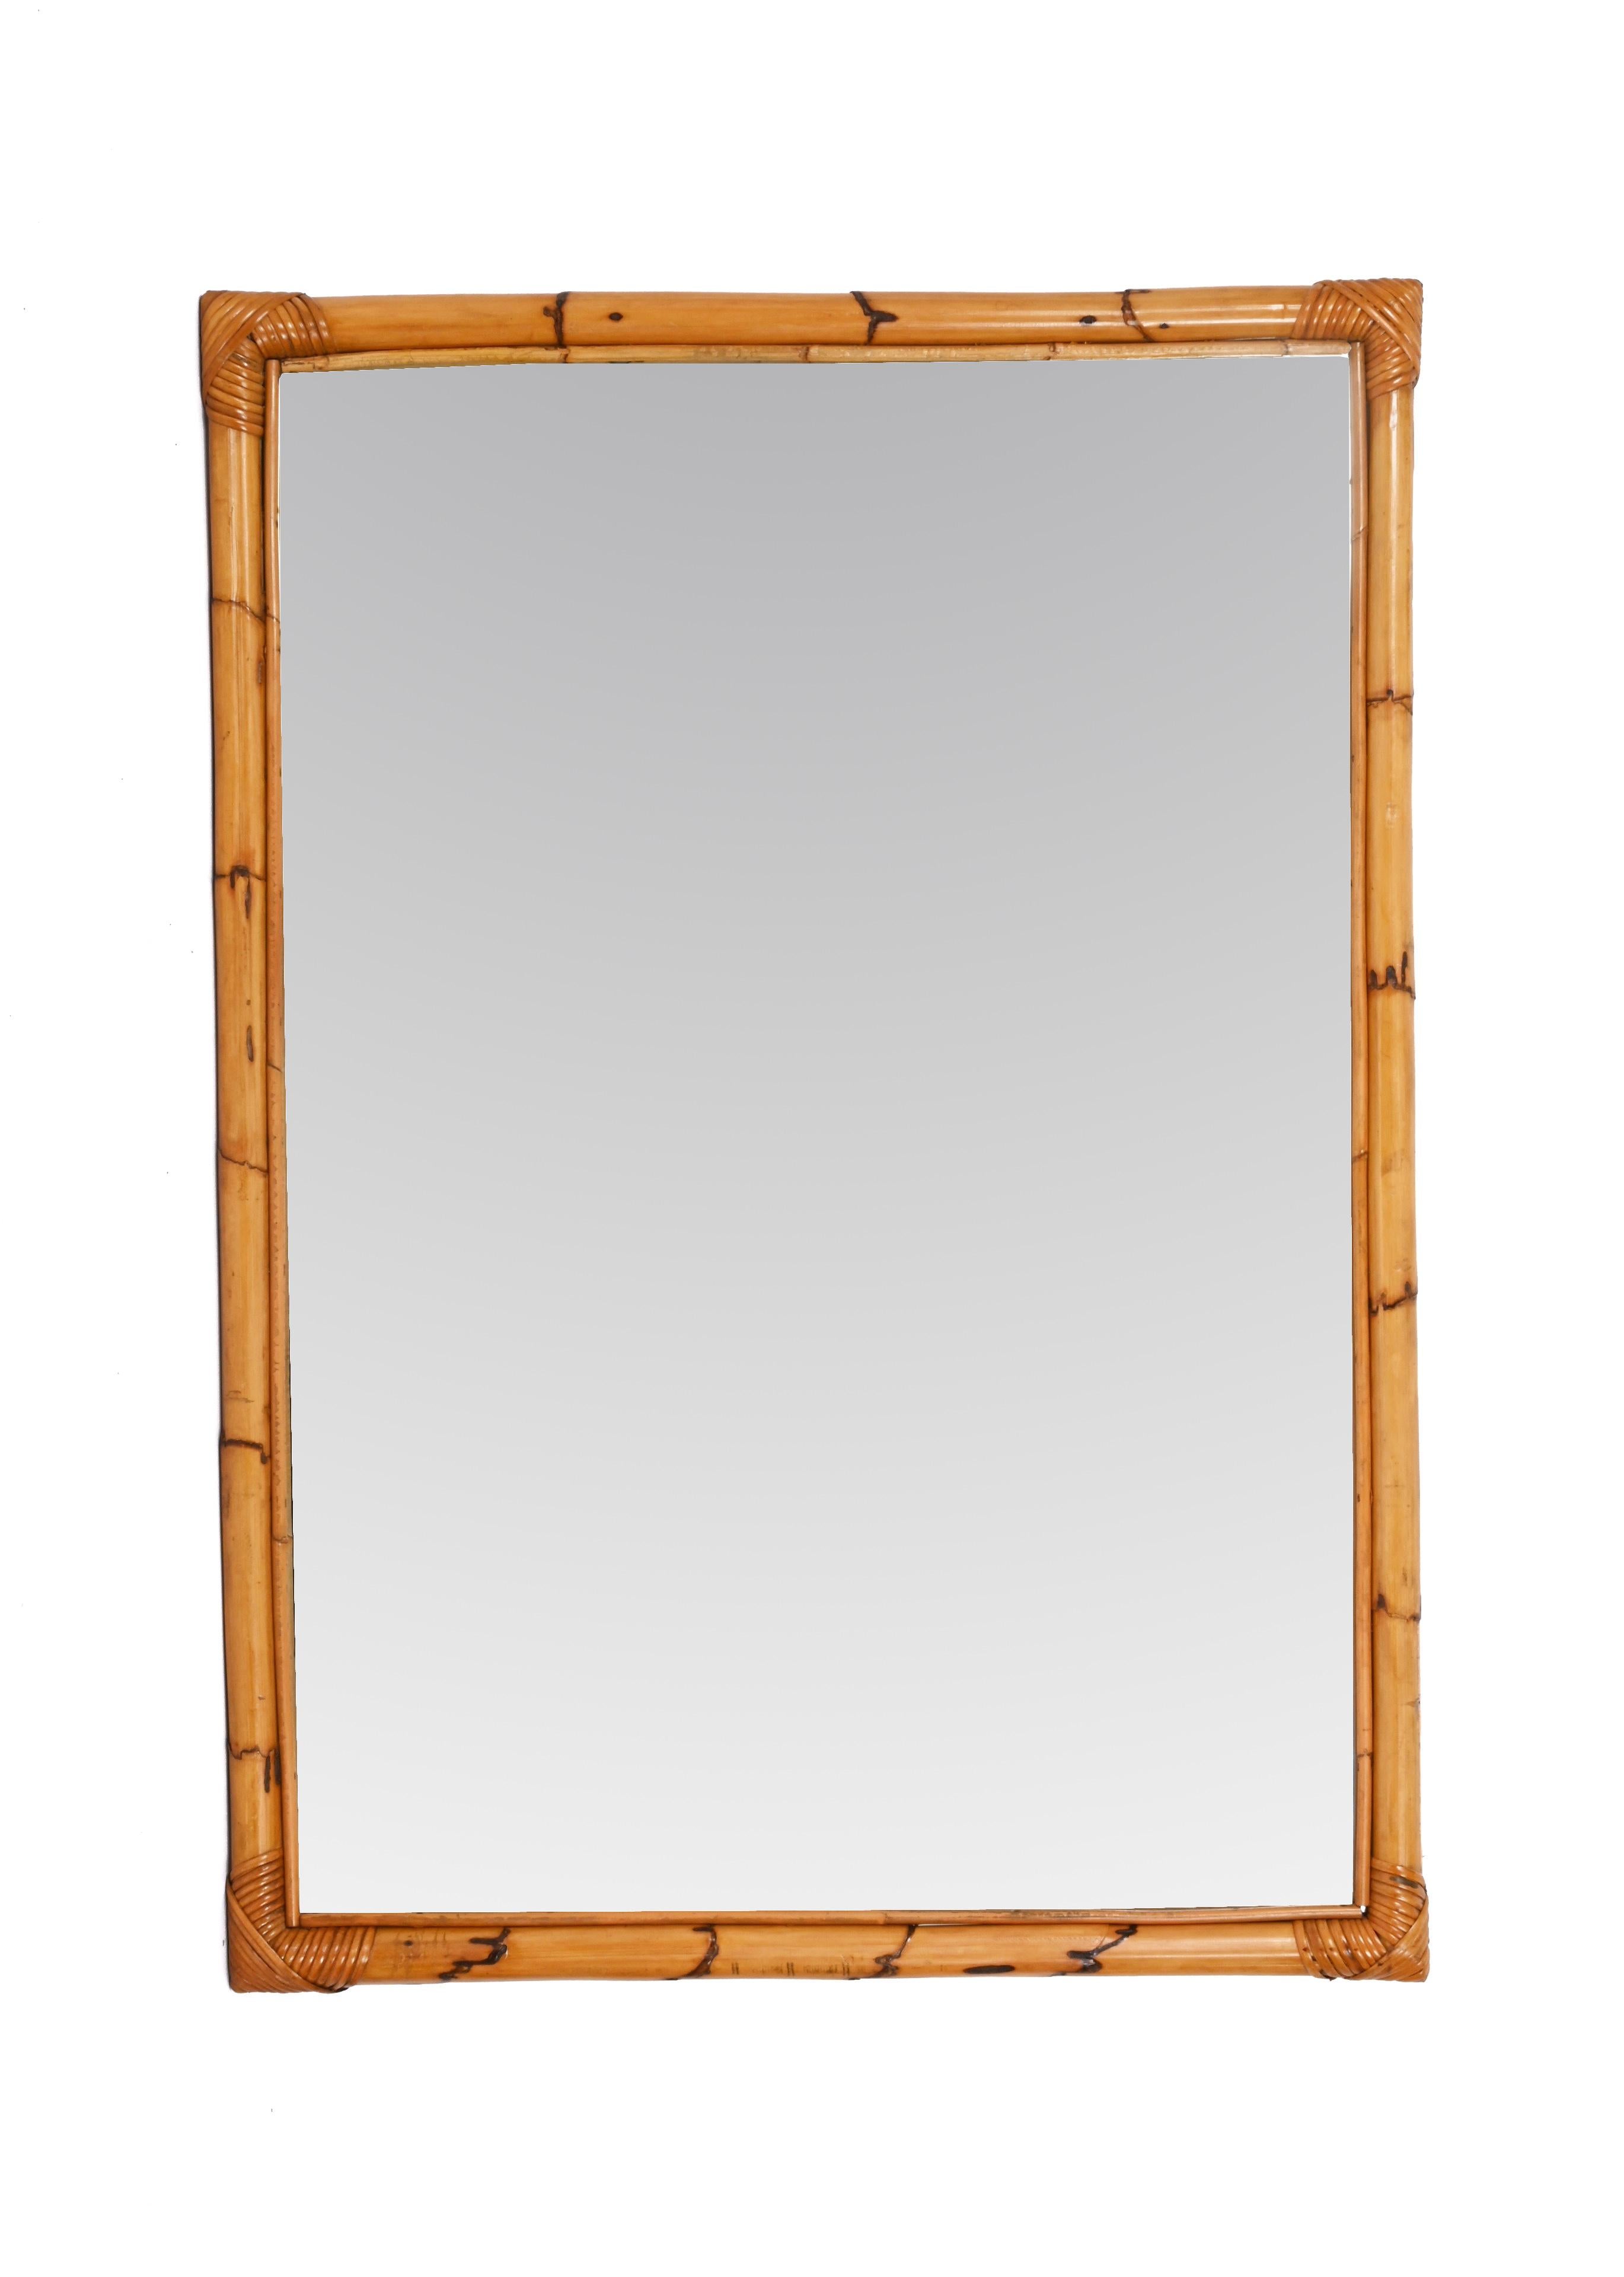 Midcentury Large Rectangular Italian Mirror with Double Bamboo Cane Frame, 1970s For Sale 1